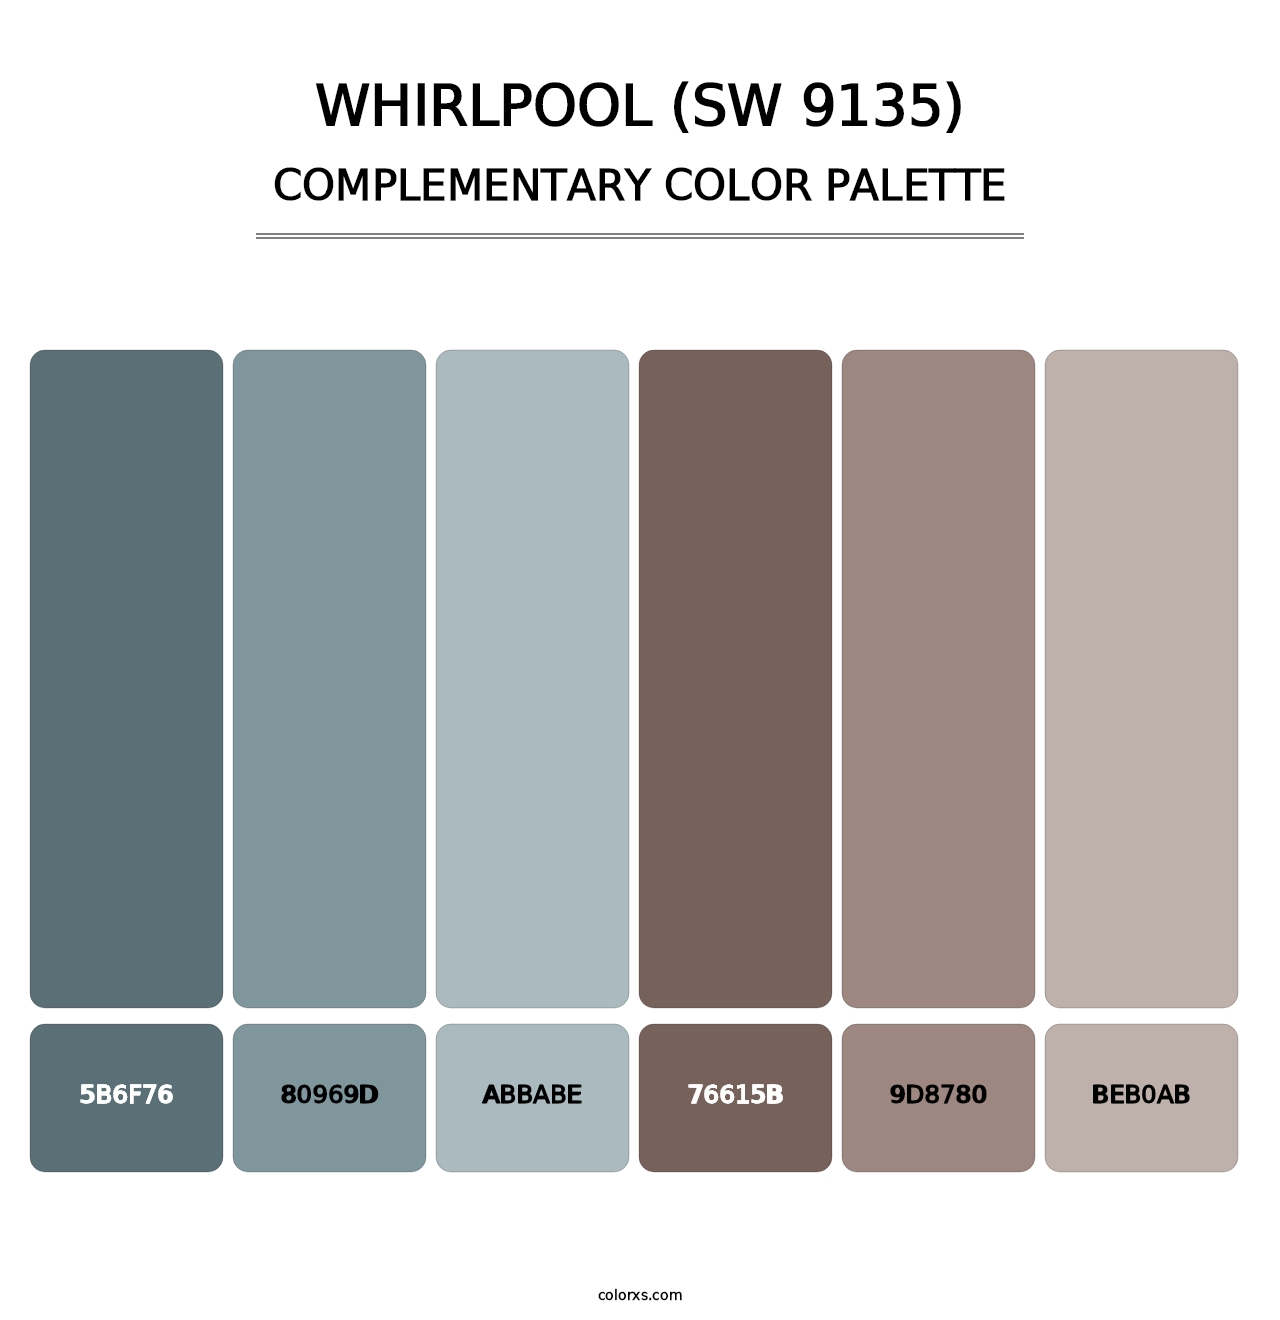 Whirlpool (SW 9135) - Complementary Color Palette